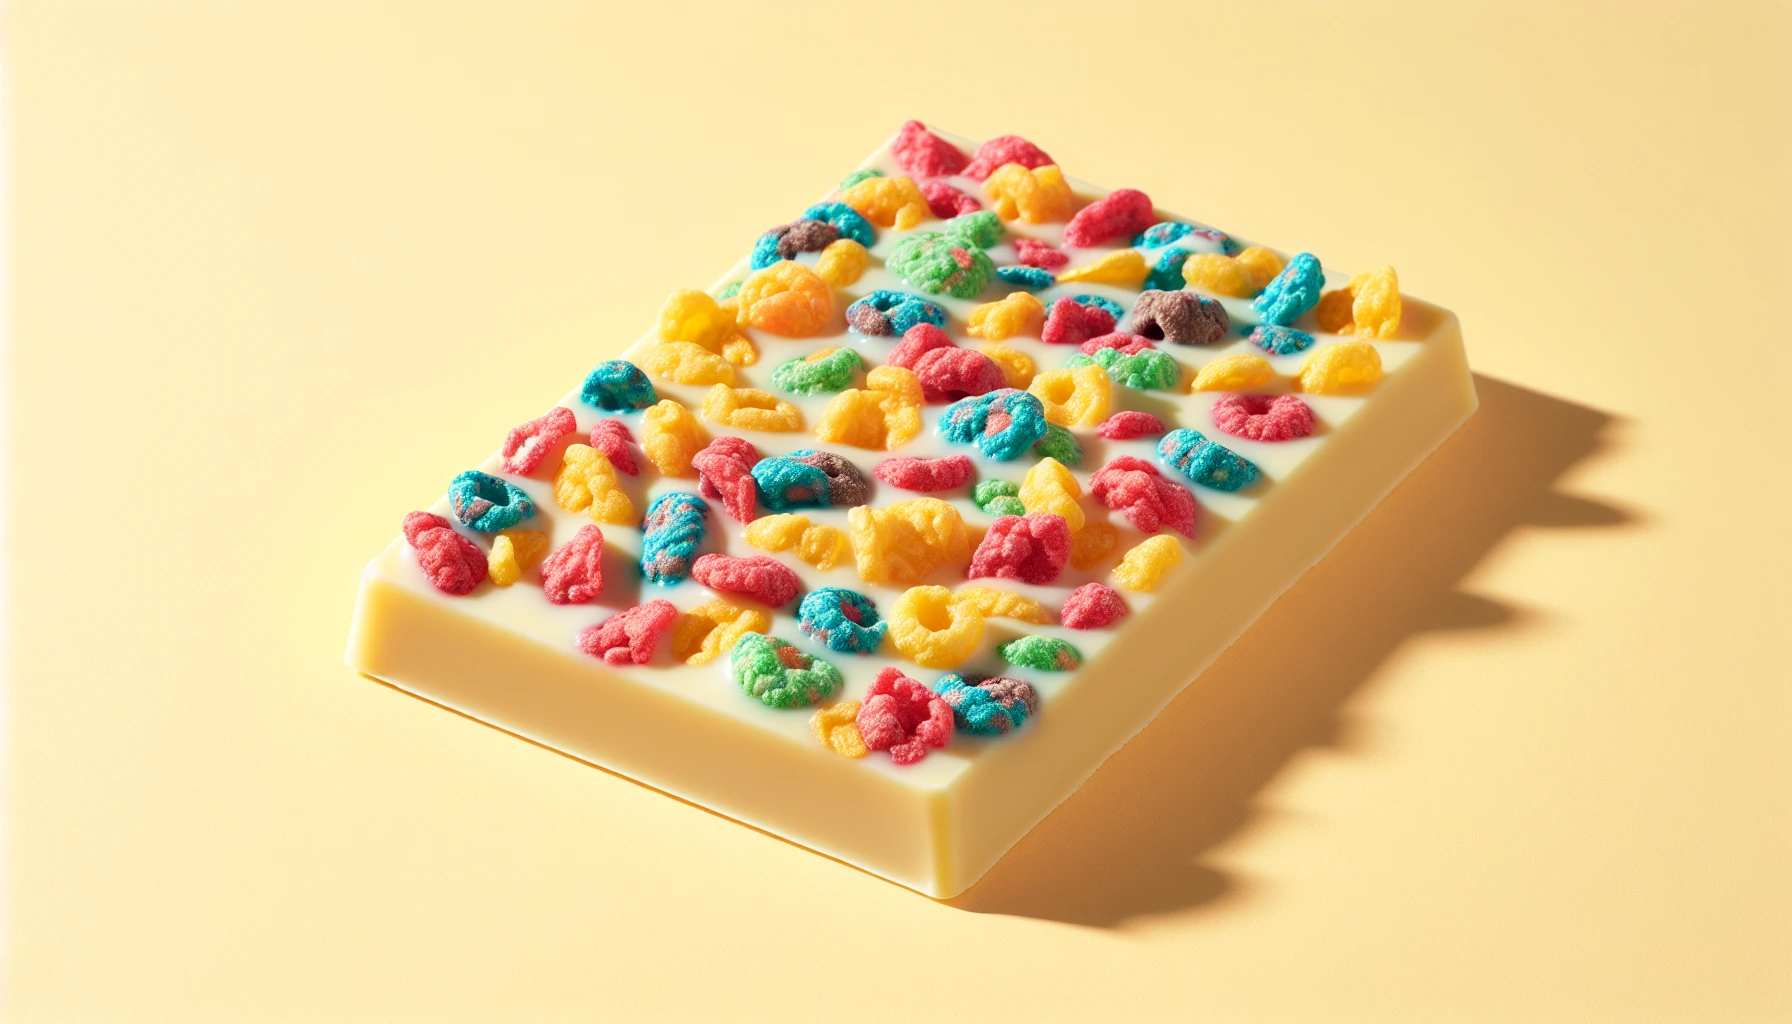 A whimsical illustration of a white chocolate bar with colorful fruity pebbles